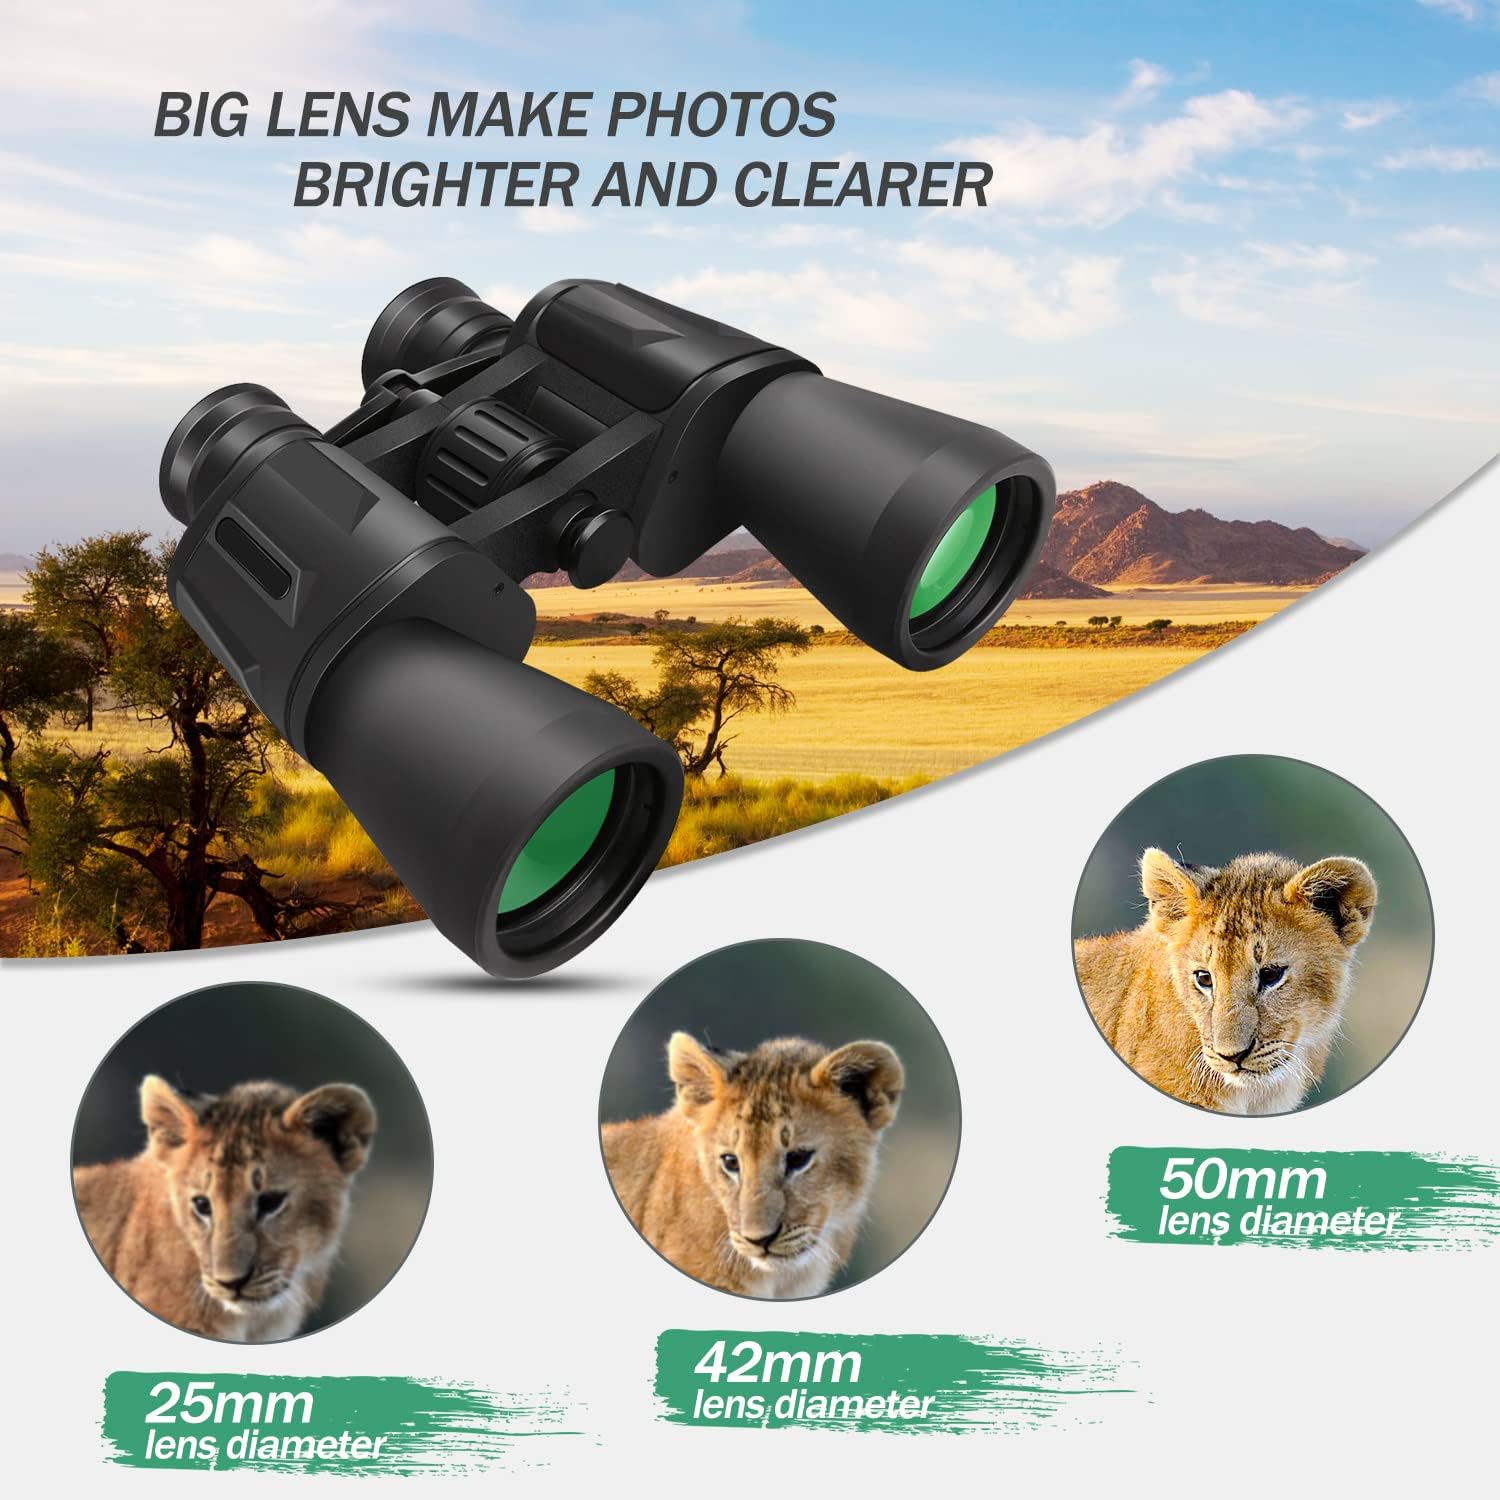 10 x 50 Binoculars for Adults, Powerful Binoculars for Bird Watching, Multi-Coated Optics Durable Full-Size Clear Binocular for Travel Sightseeing Outdoor Sports Games and Concerts